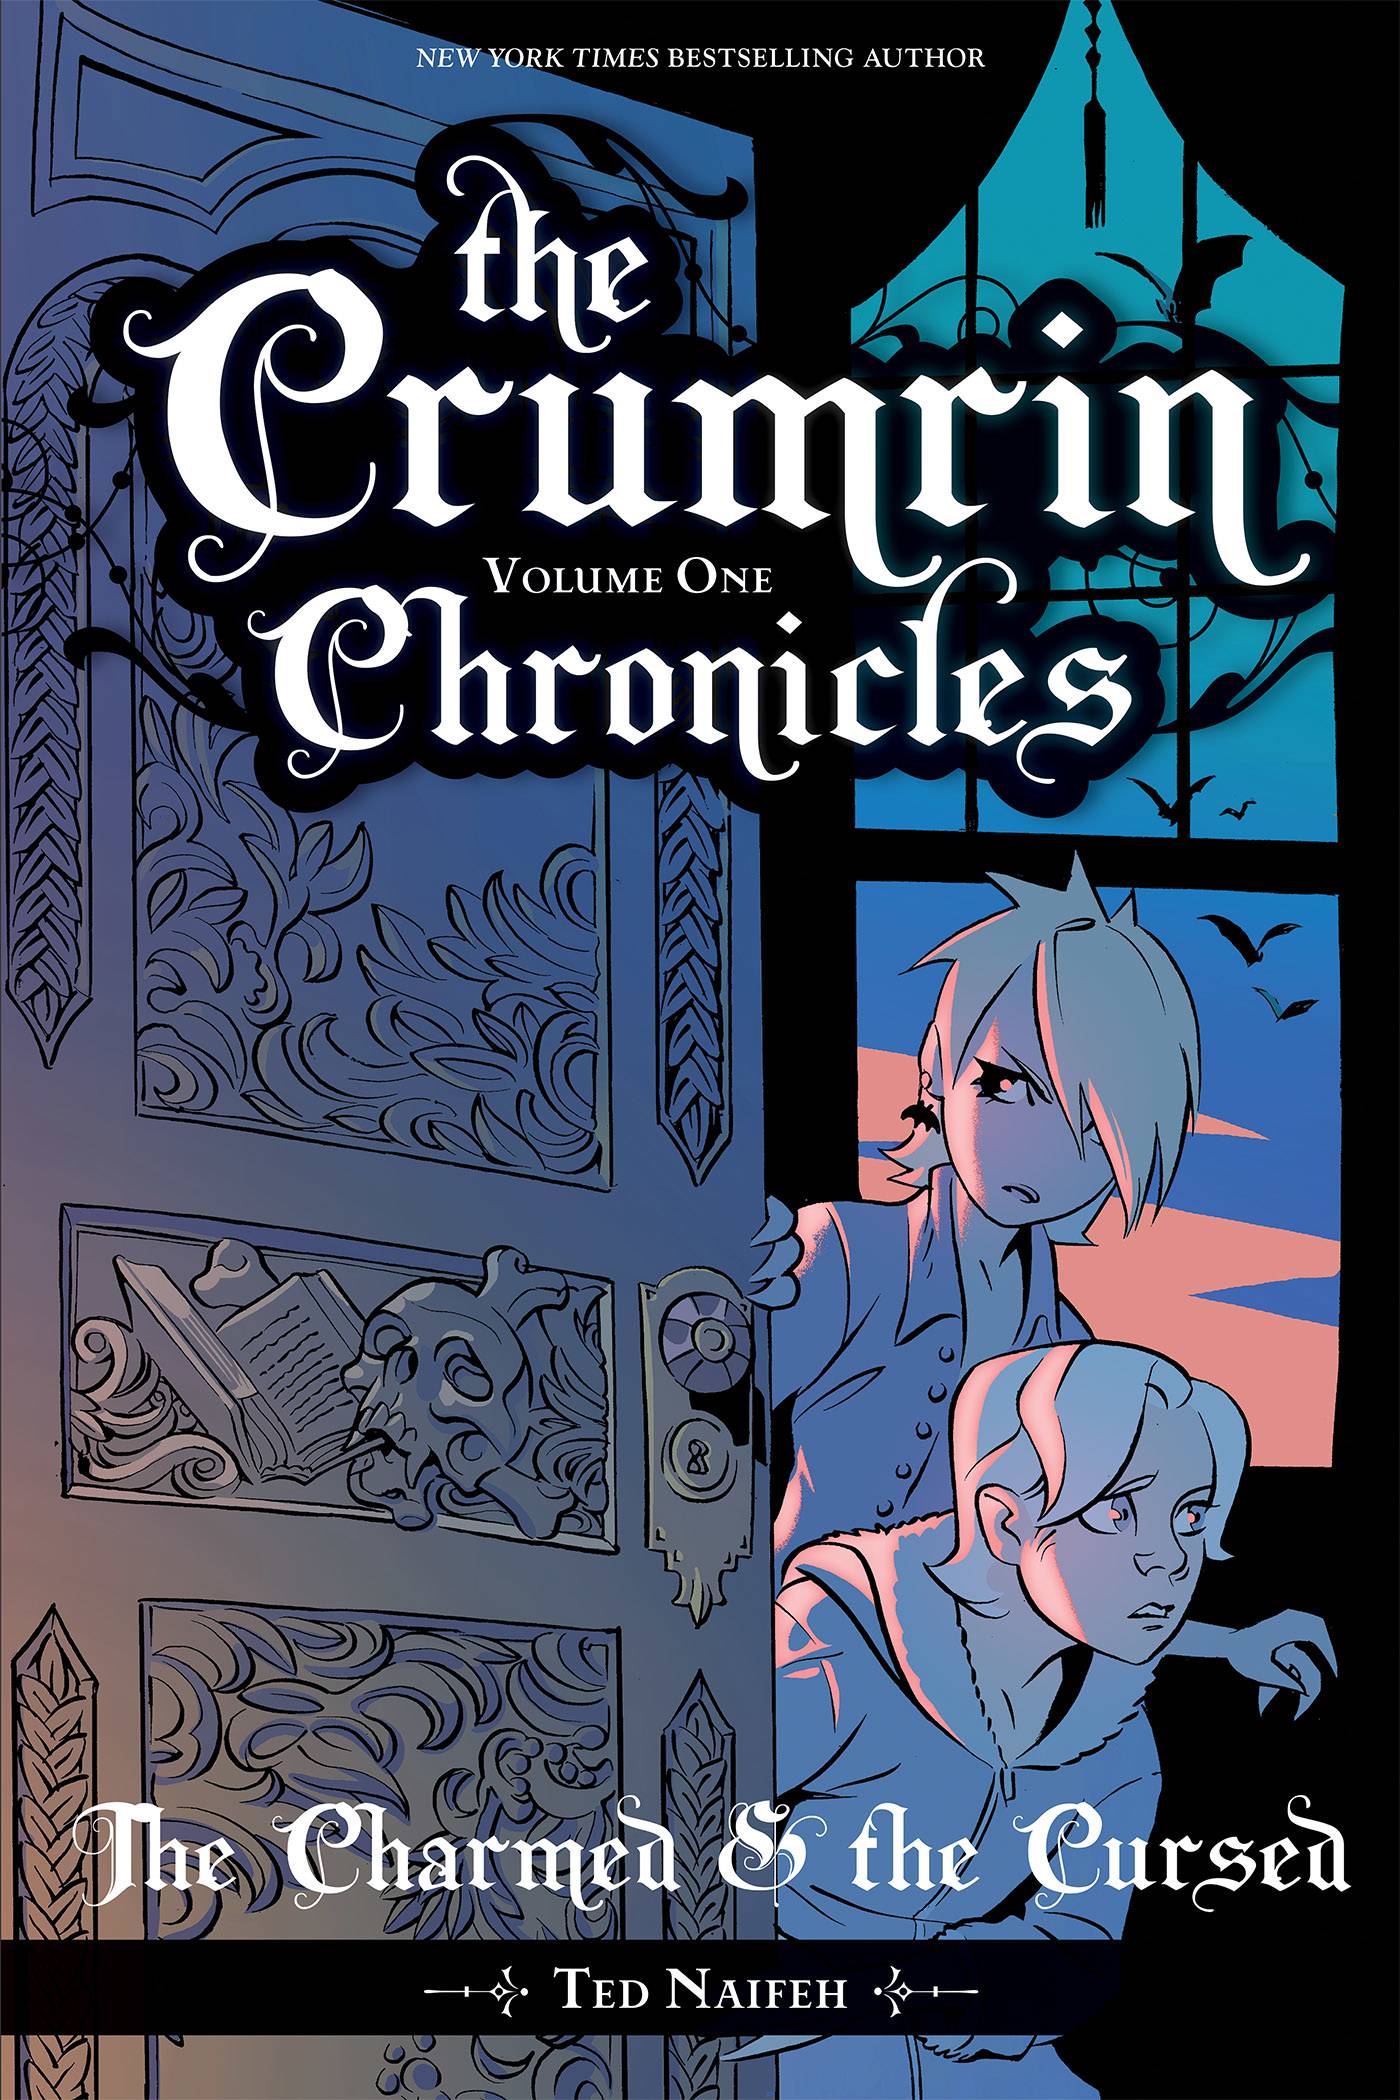 The Crumrin Chronicles vol 1: The Charmed And The Cursed s/c